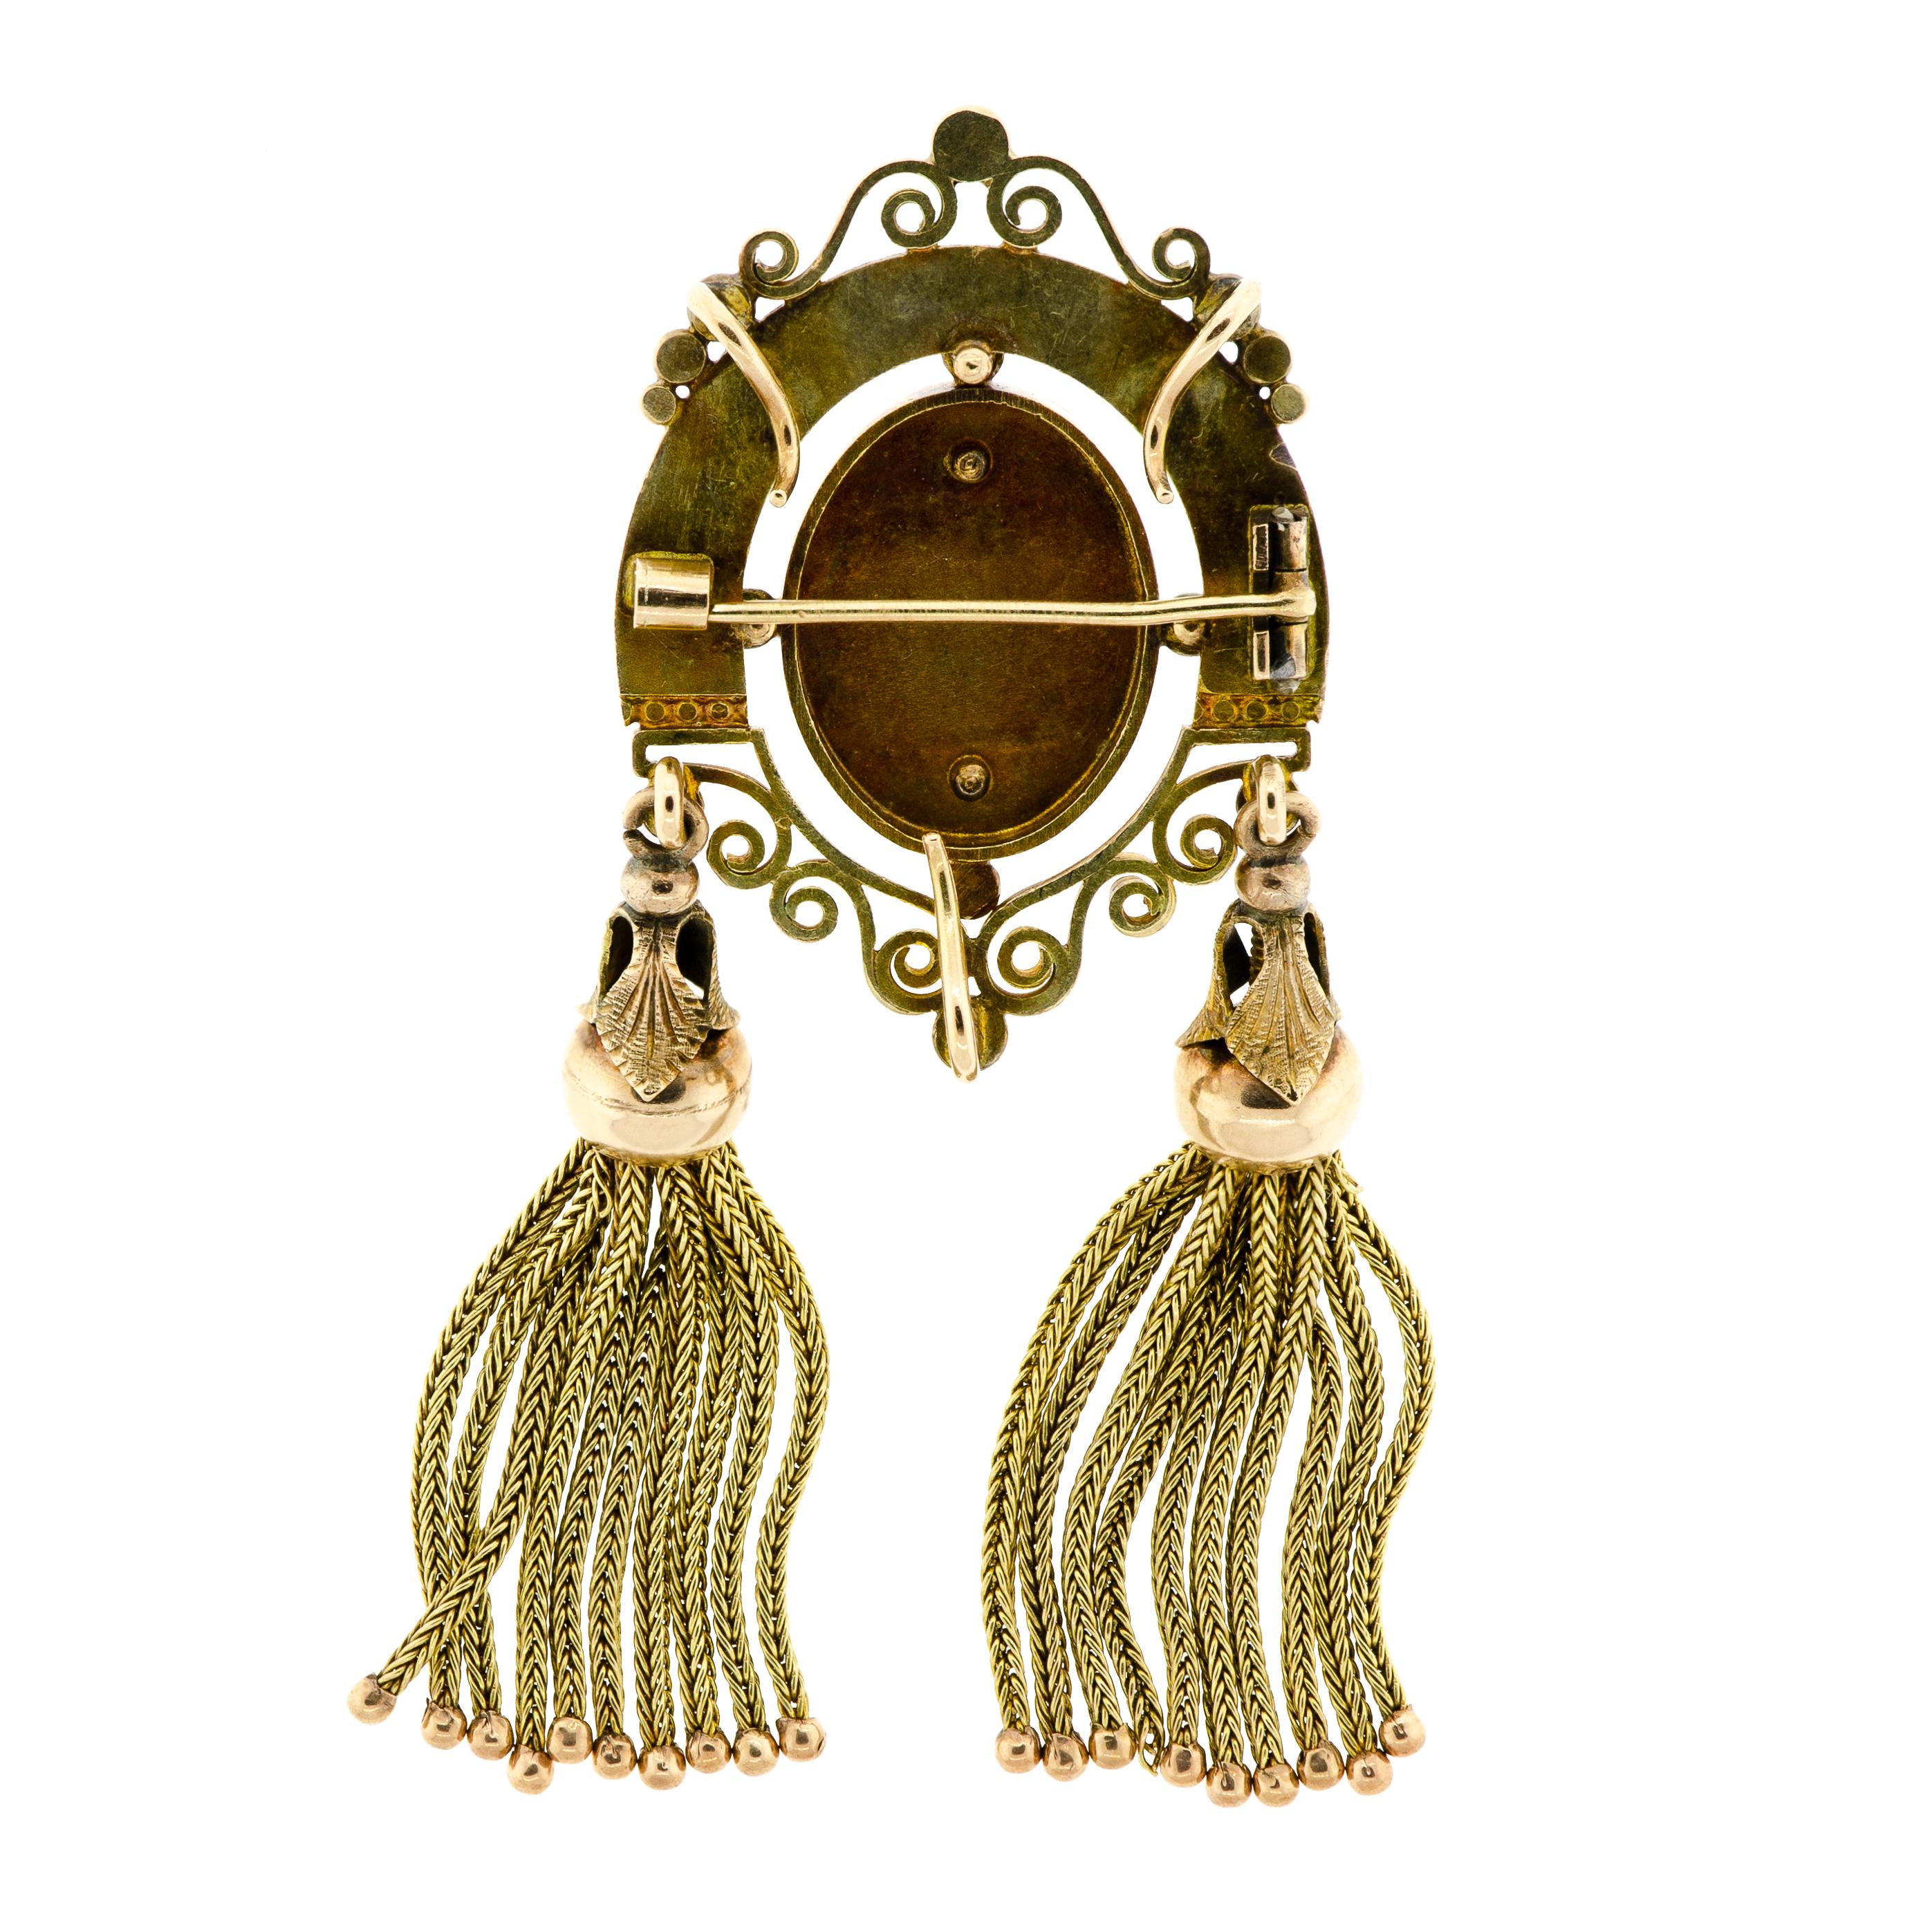 Absolutely spectacular Victorian Circa 1870 14Kt yellow gold and black/white hardstone cameo of a Beautiful woman in profile, with wonderful tassel drops, lovely scrolled and applied gold detail work. Reverse: all original, tube hinge, c-catch, Hook